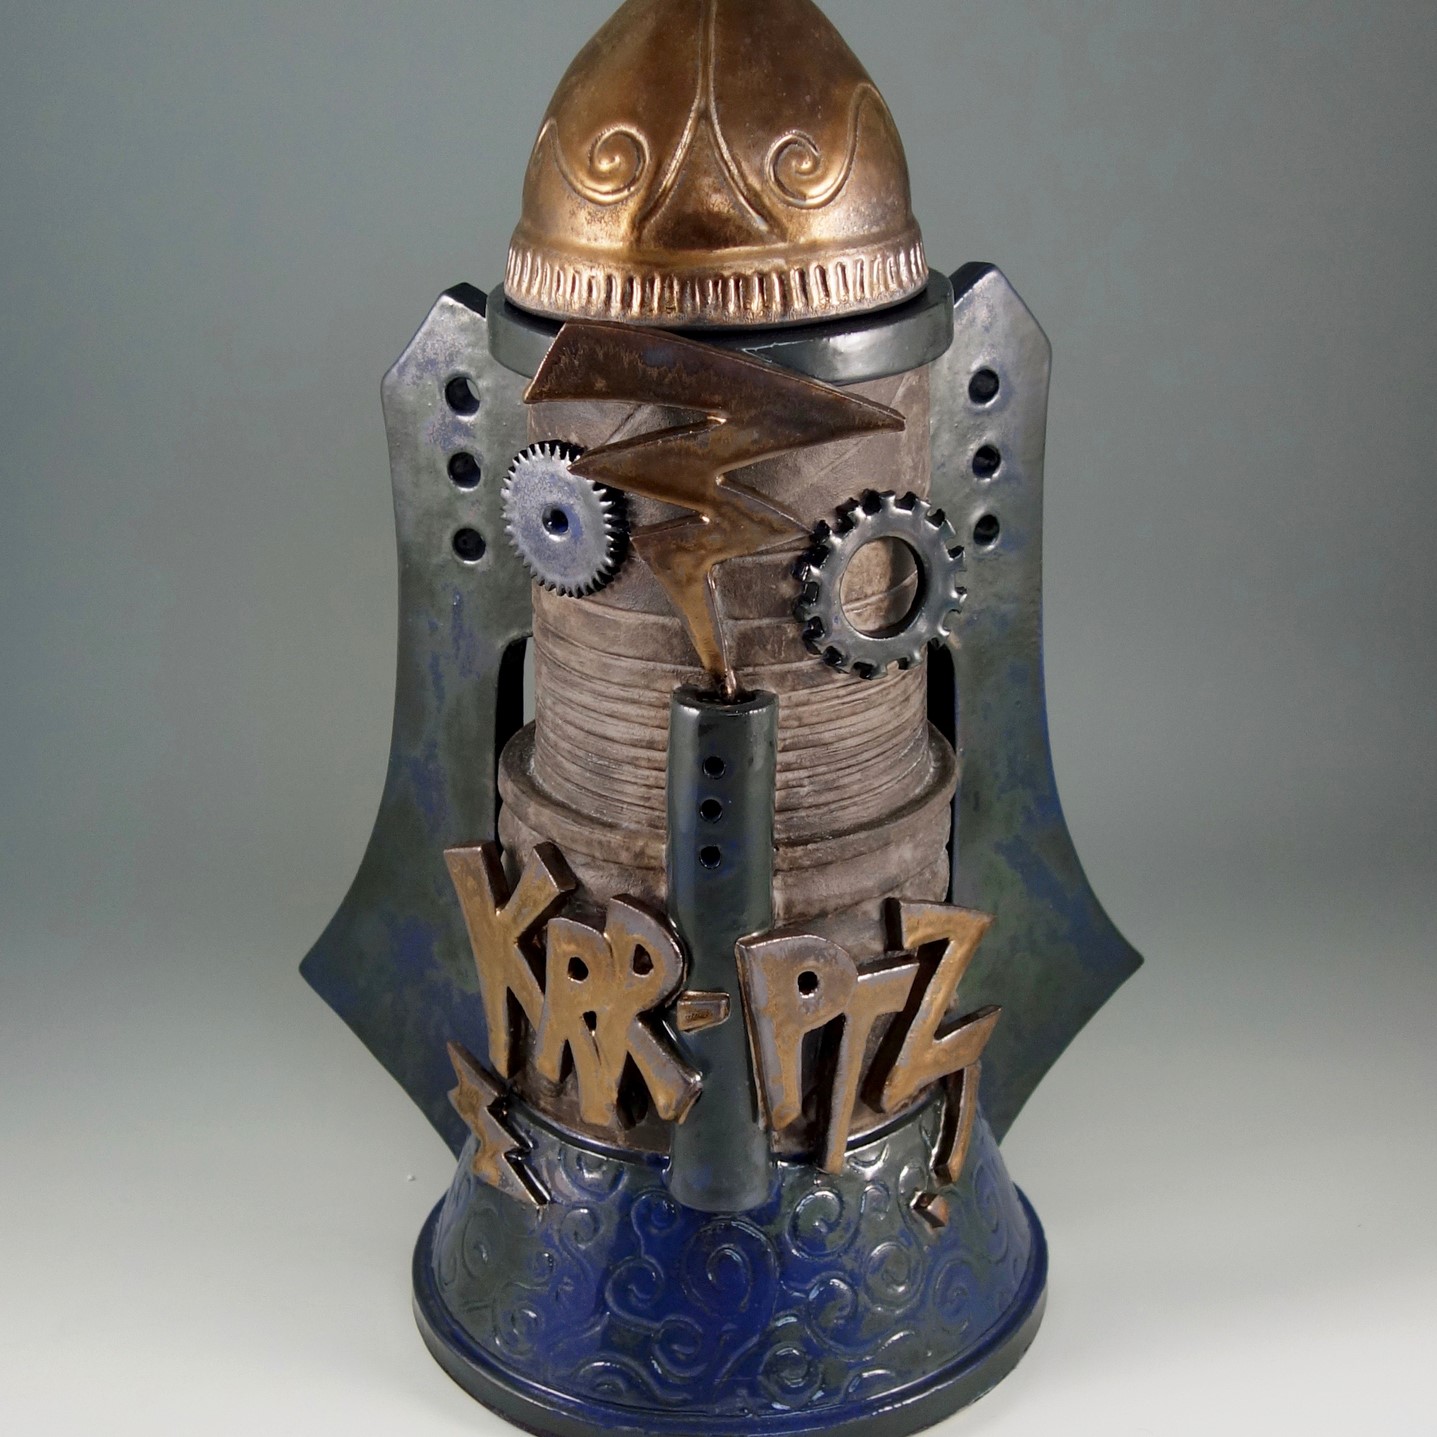  dark blue, metal, and bronze colored, futuristic style cookie jar with the word "KRR-PTZ" on the front with metal cogs and bronzed lightening strikes.